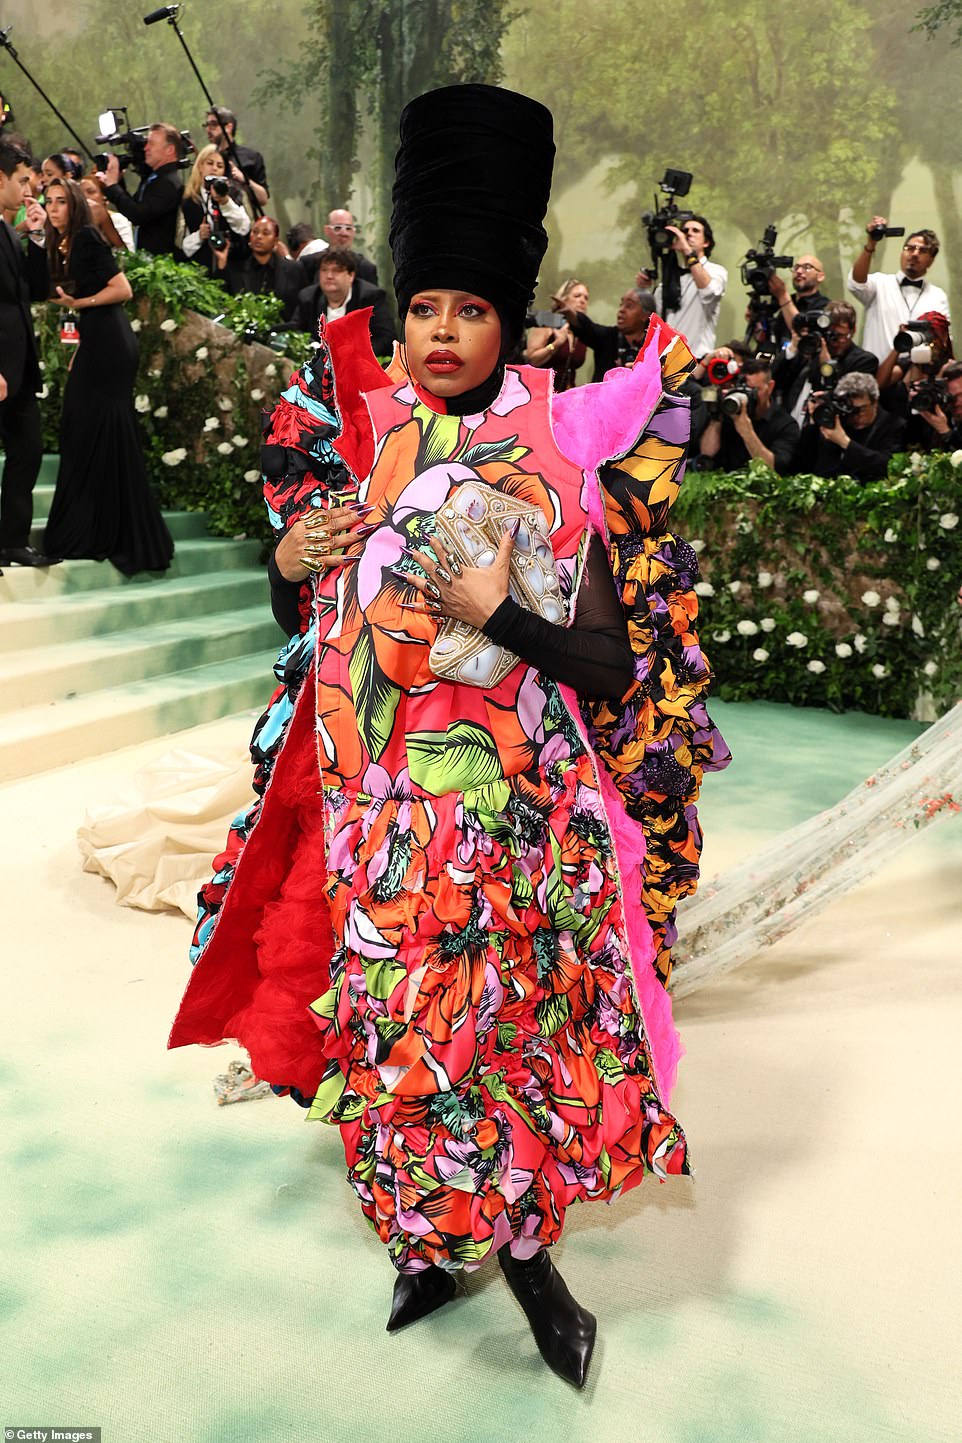 Erykah Badu wore a striking patterned frock with a red and pink accents